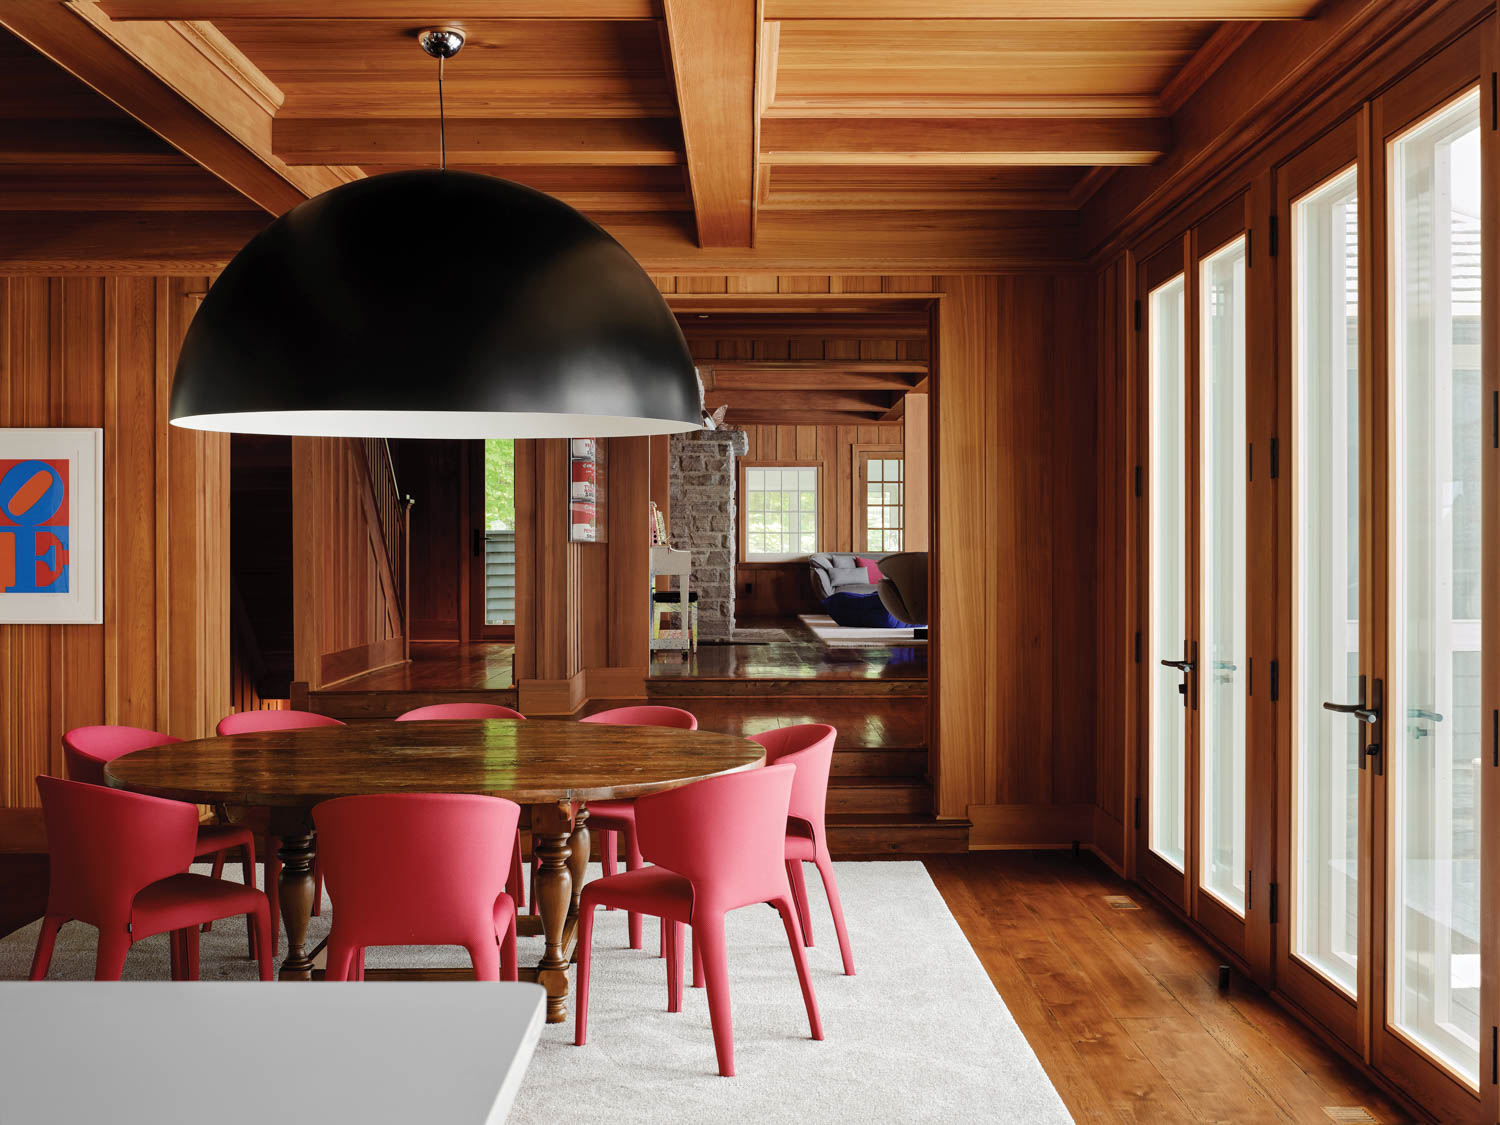 red chairs surround a dining table under a large black pendant light in a cottage